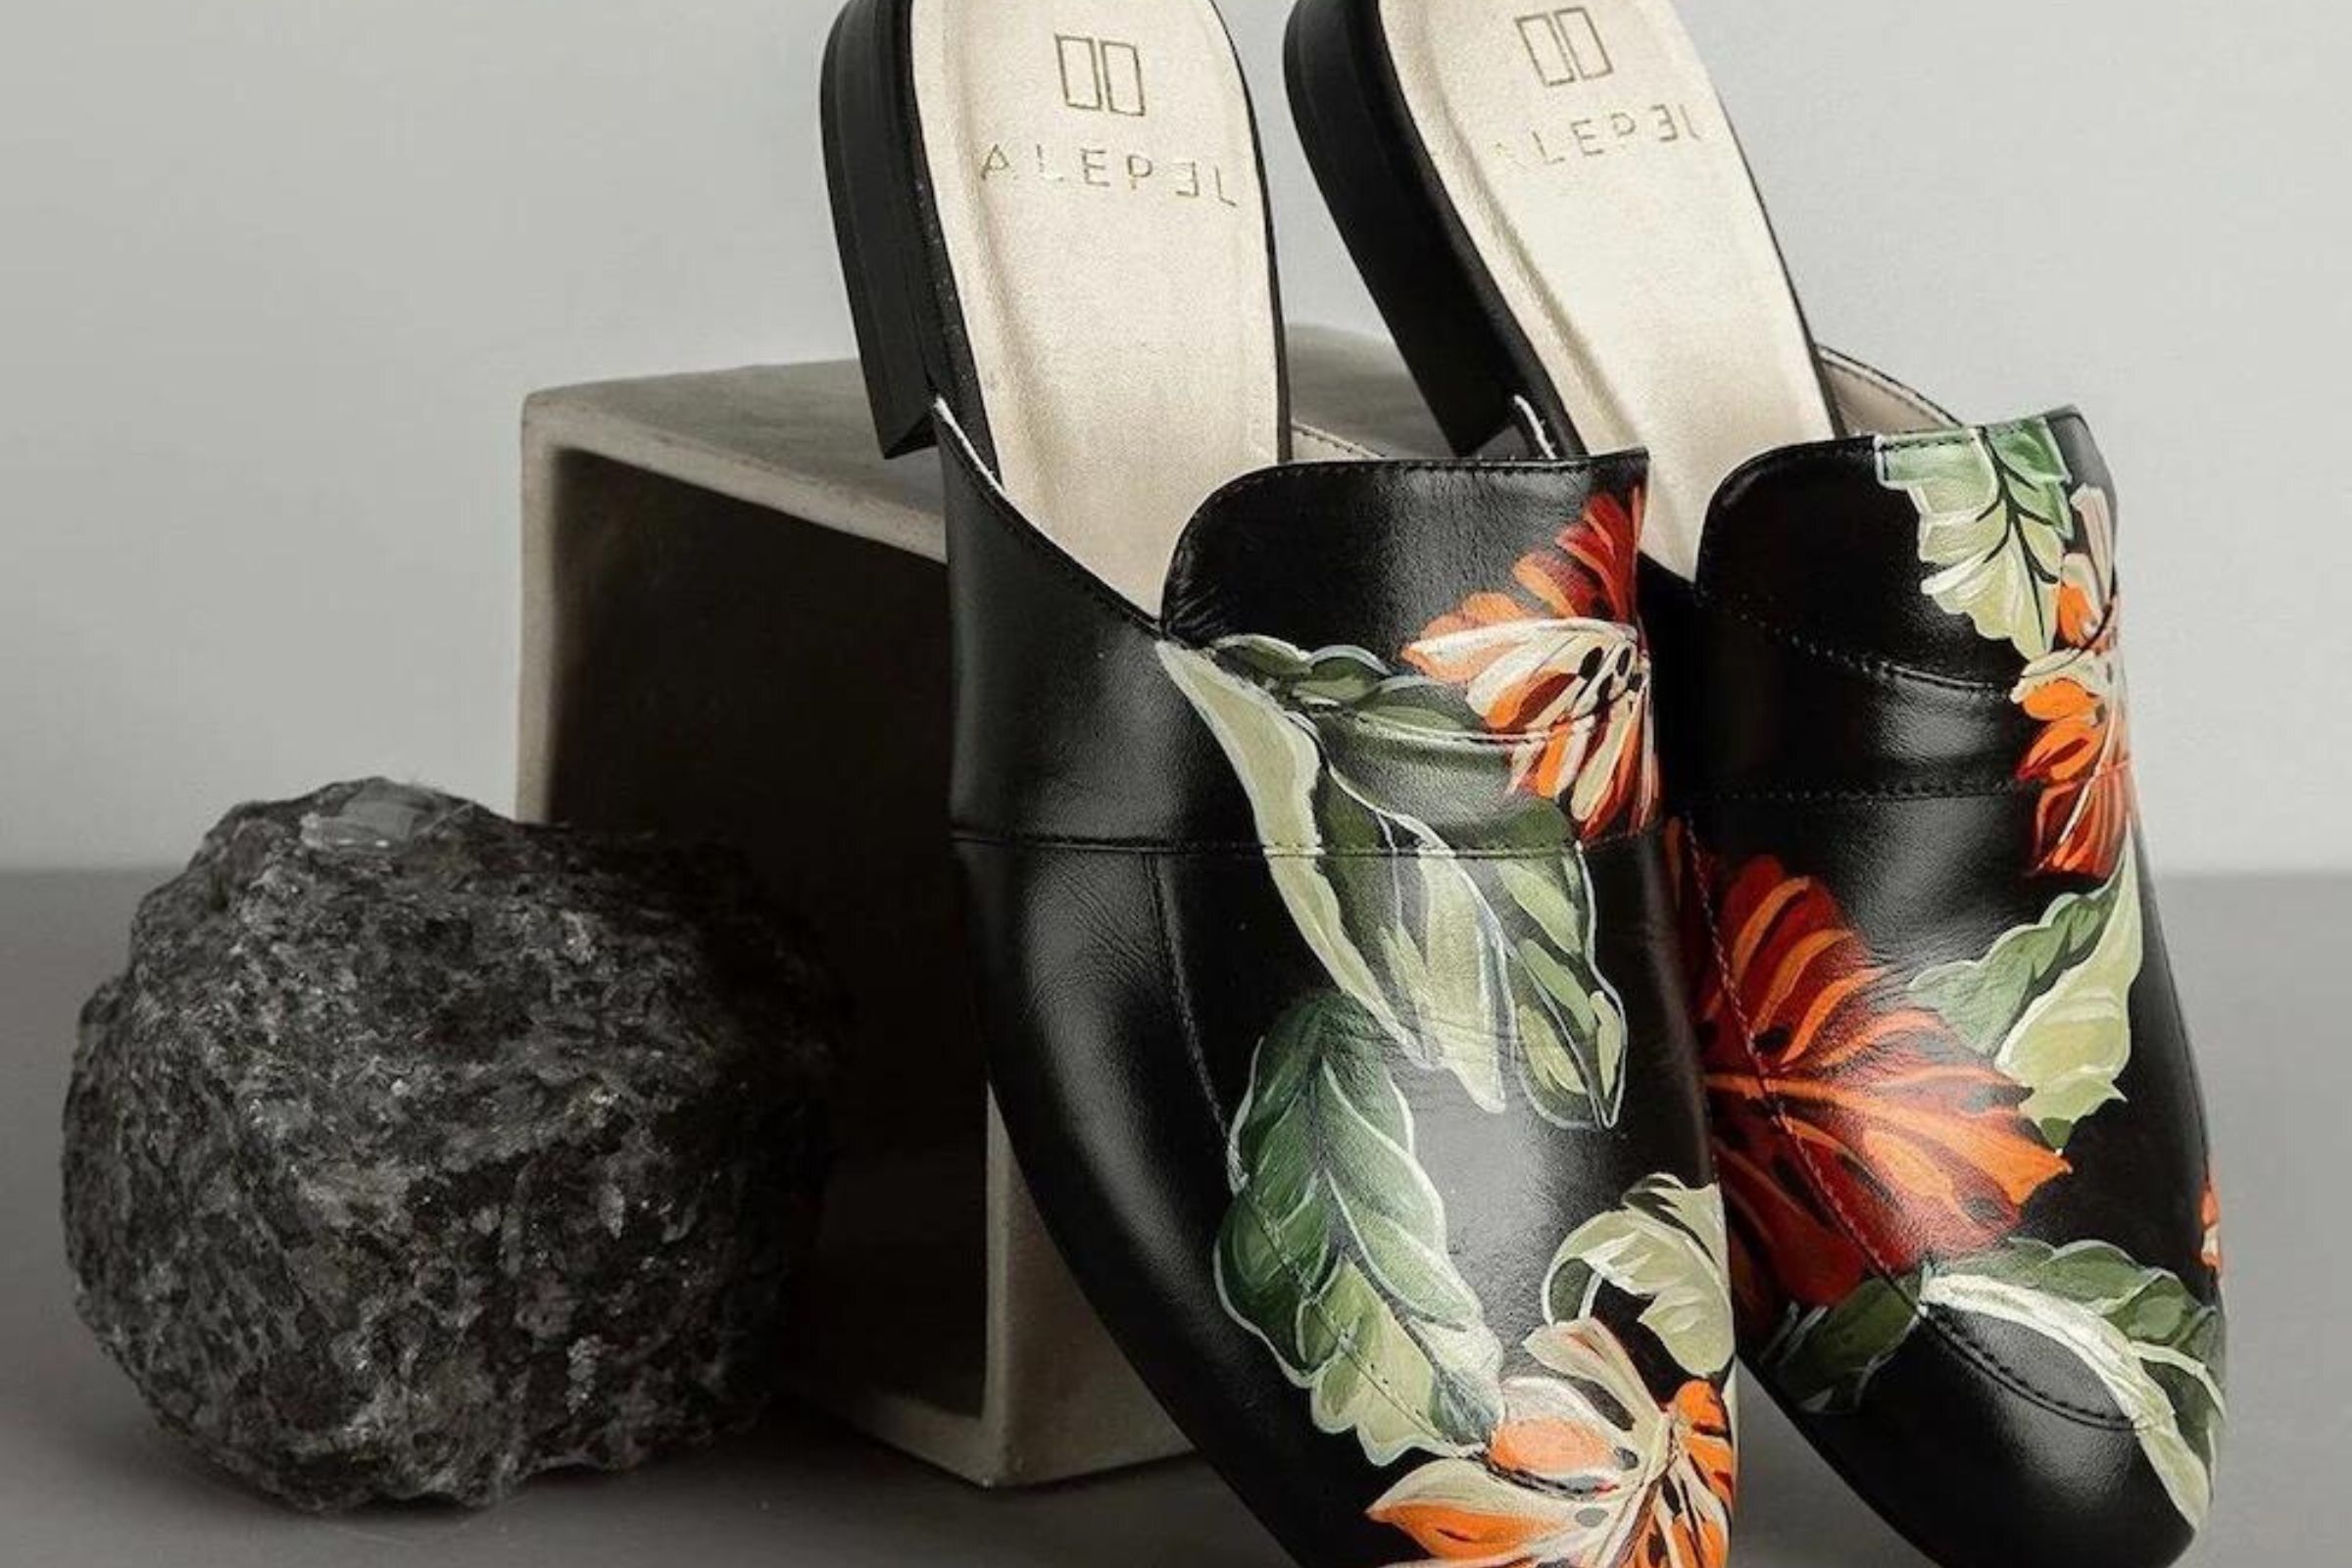 alepel-unique-hand-painted-florals-on-shoes-and-accessories-featured